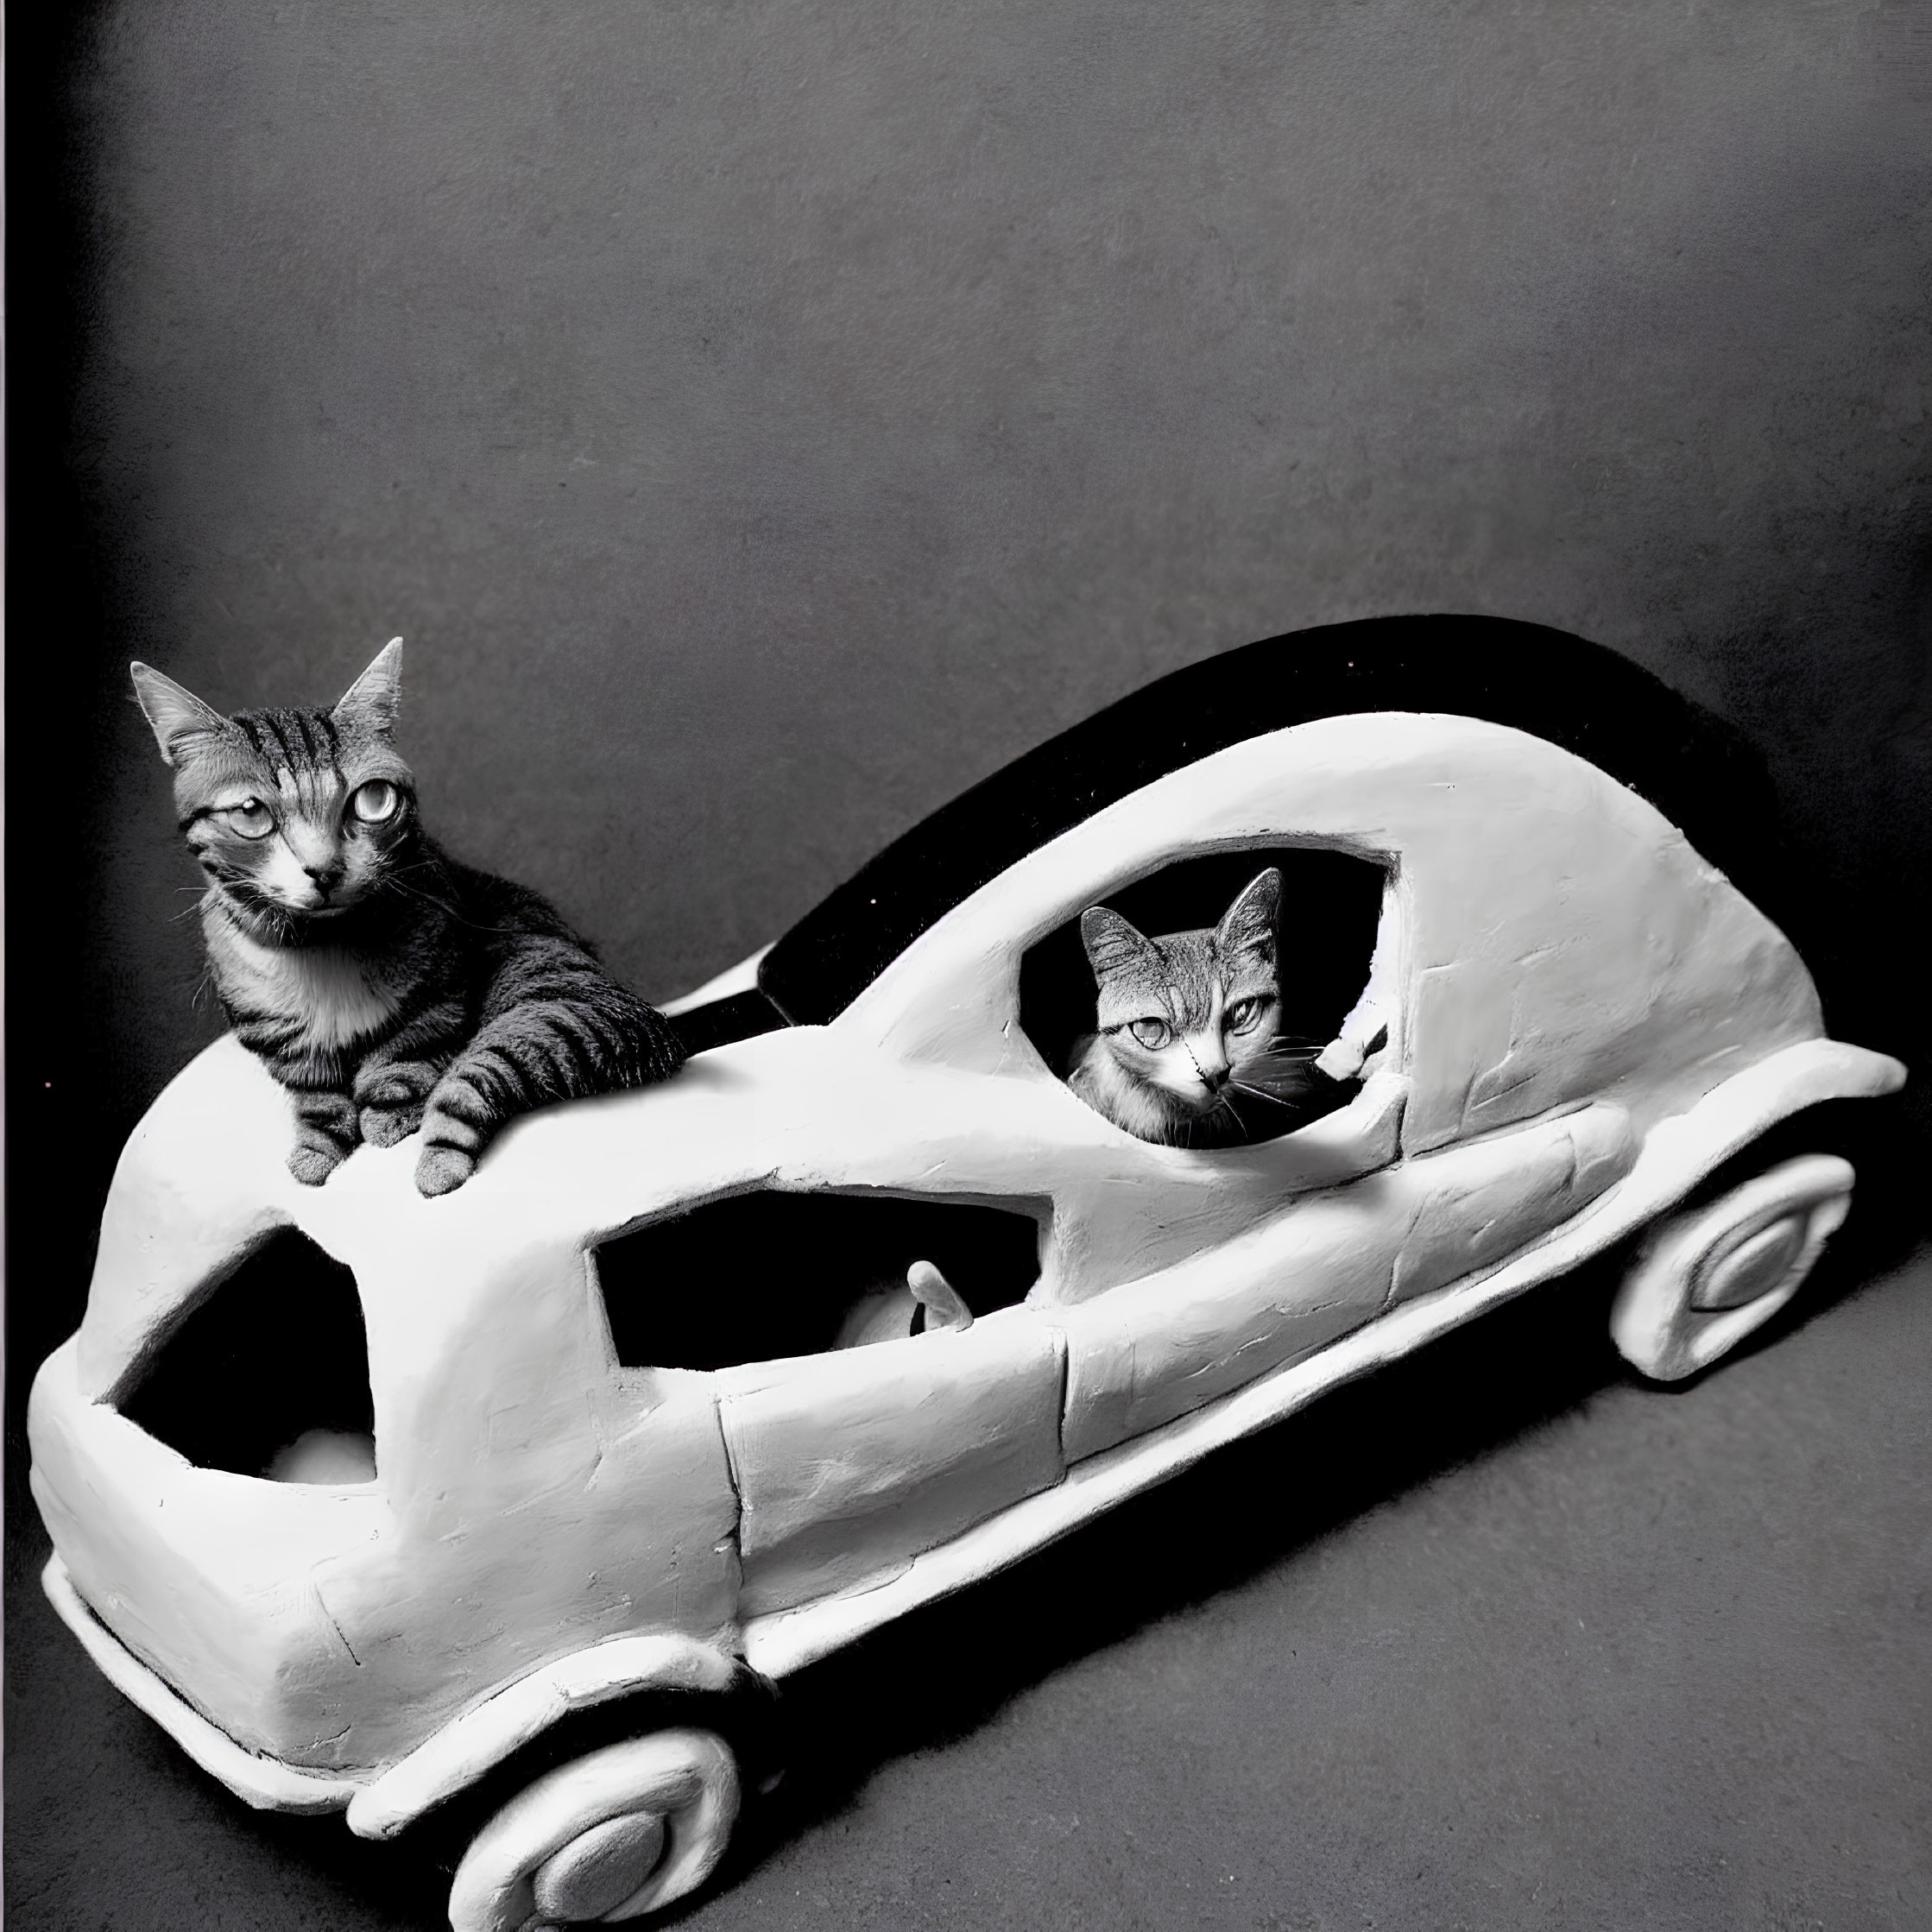 Two Cats Sitting Inside and on Top of White Toy Car on Dark Background